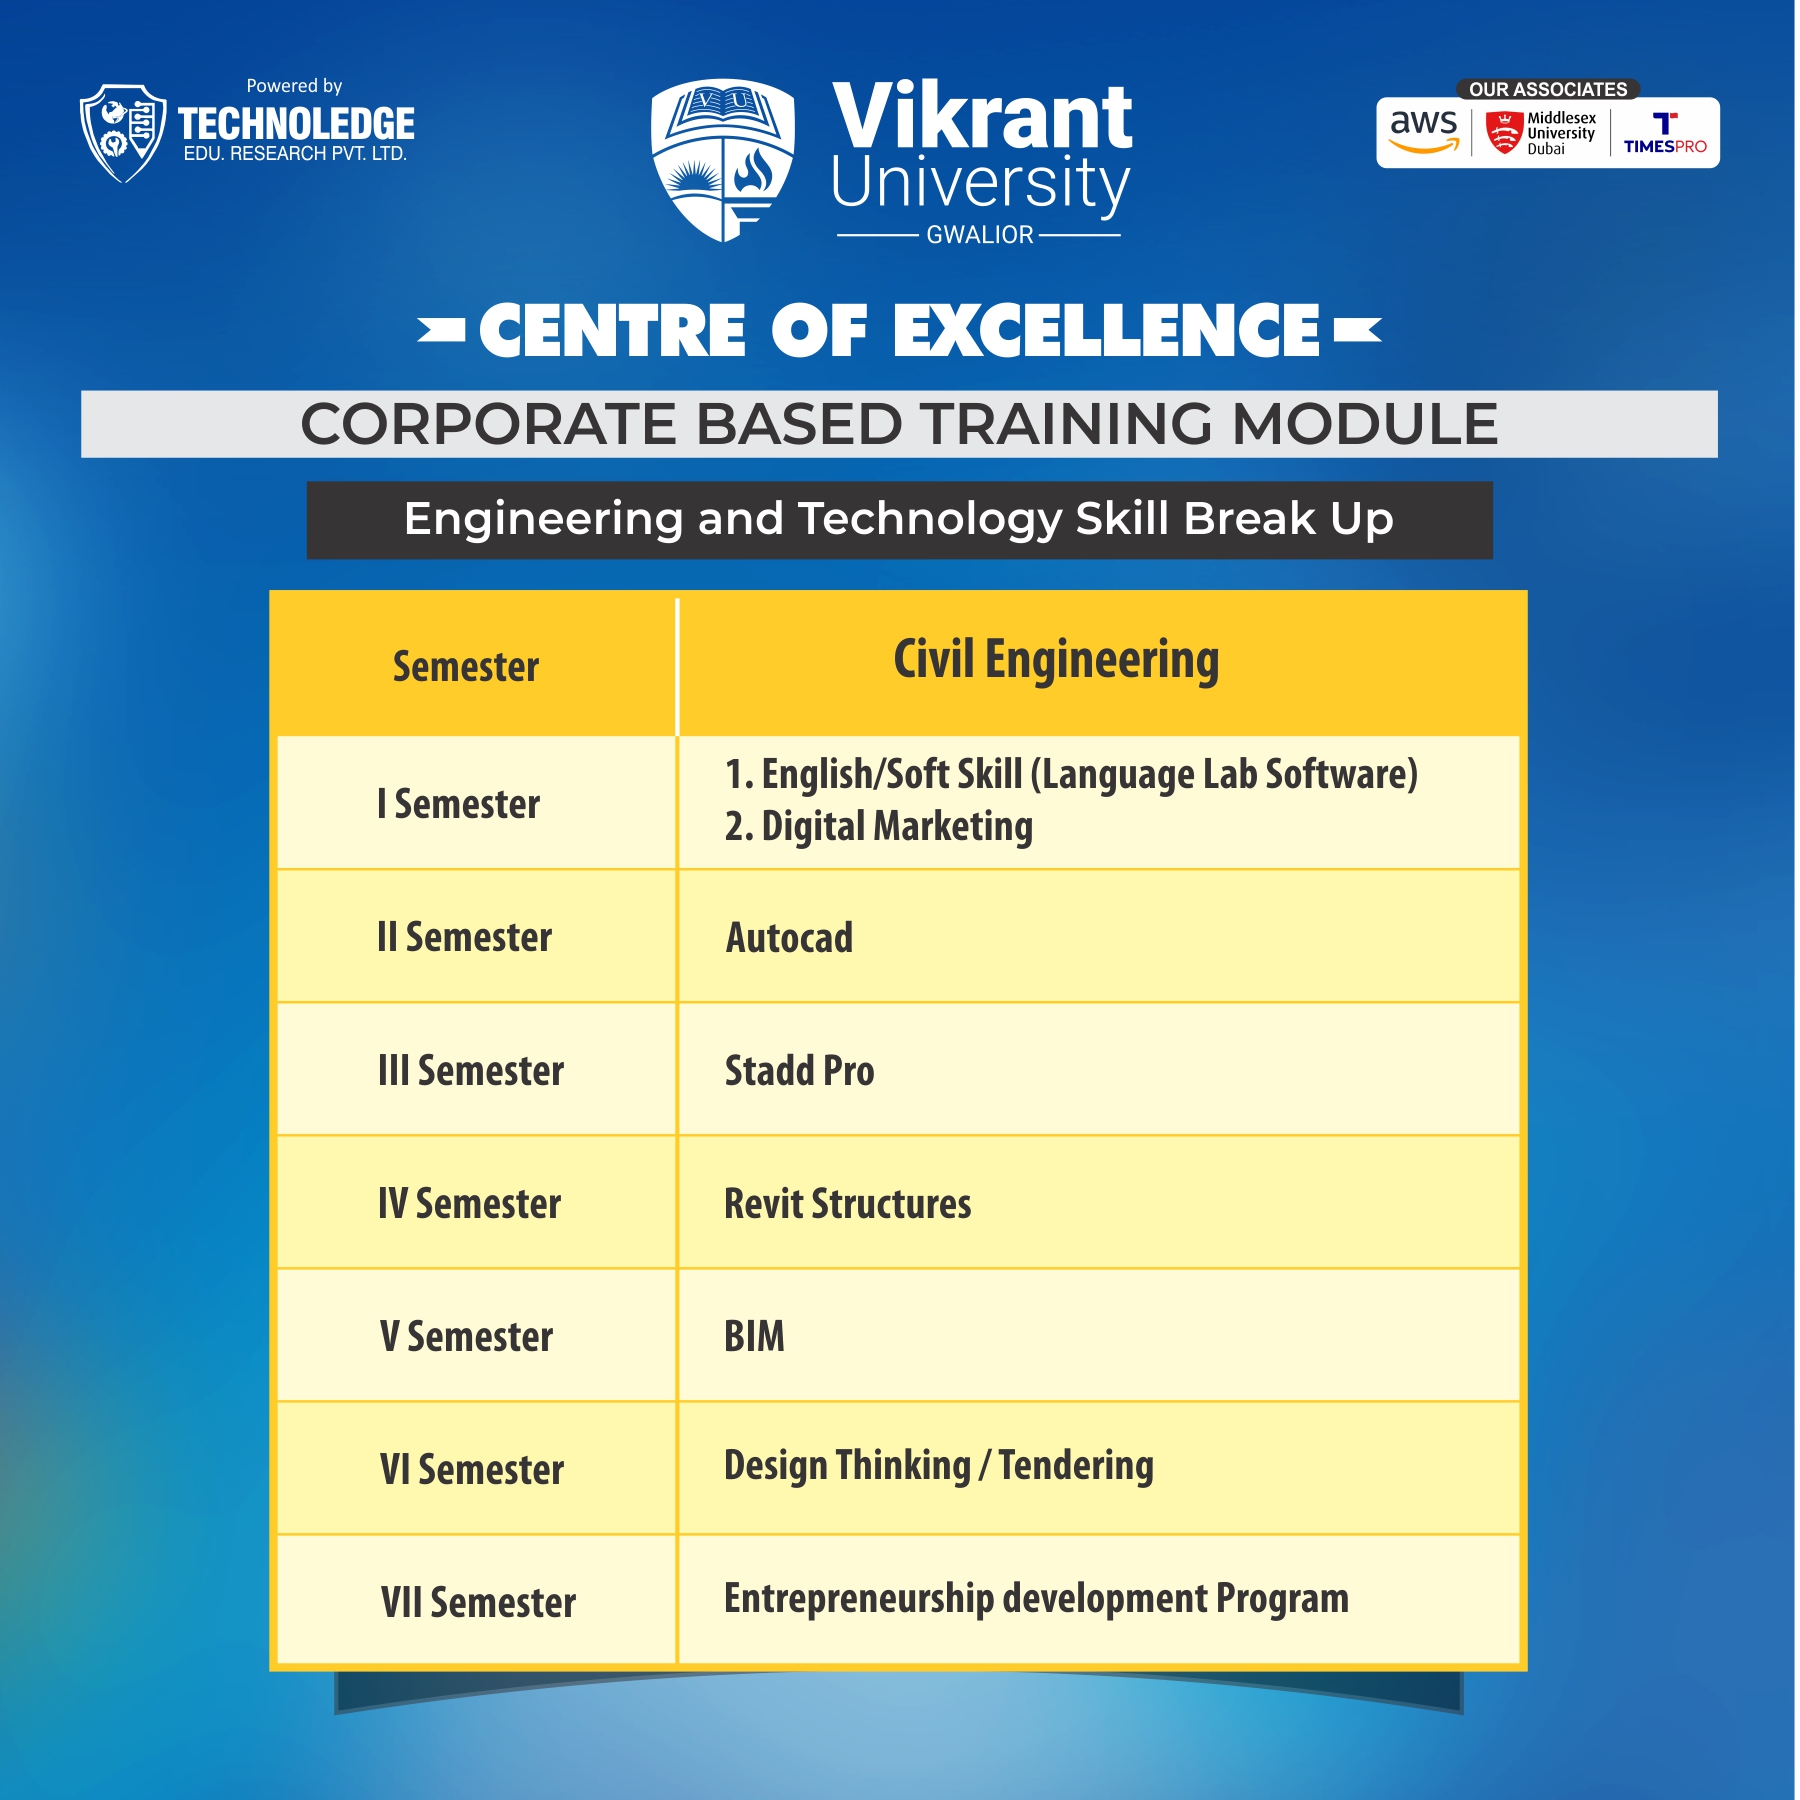 Centre of Excellence, Vikrant University, Gwalior